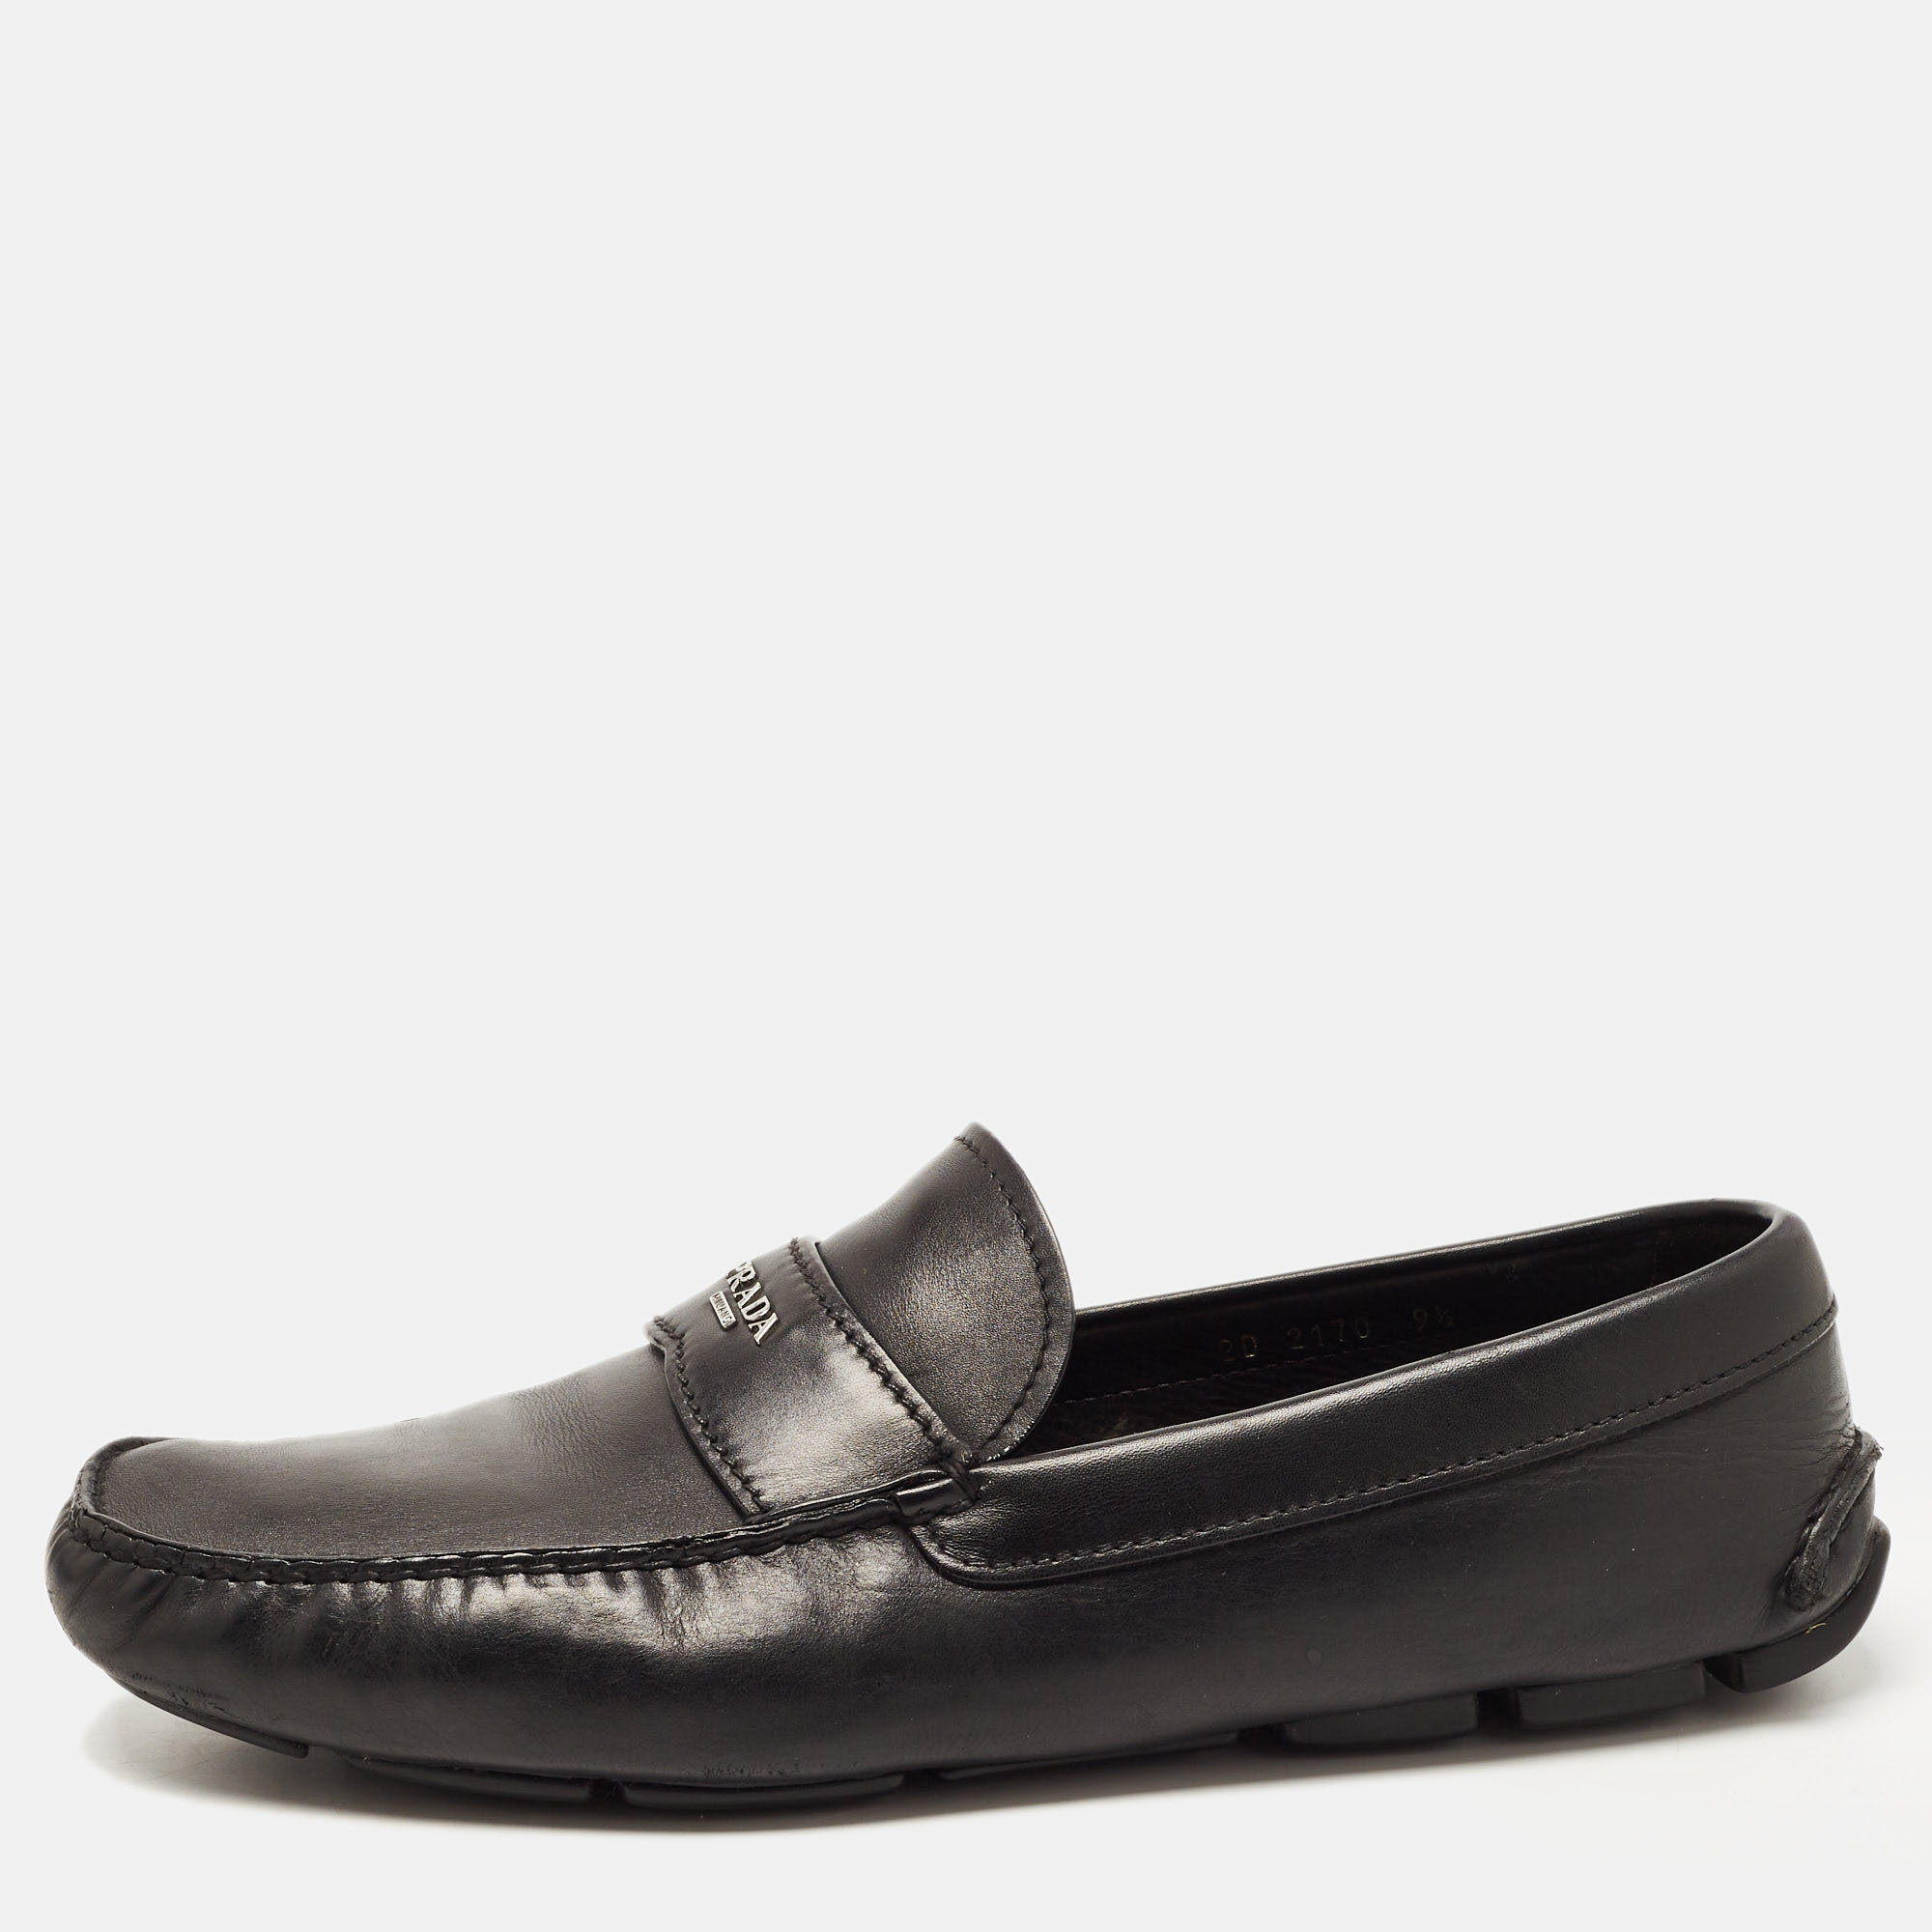 Pre-owned Prada Black Leather Slip On Loafers Size 43.5